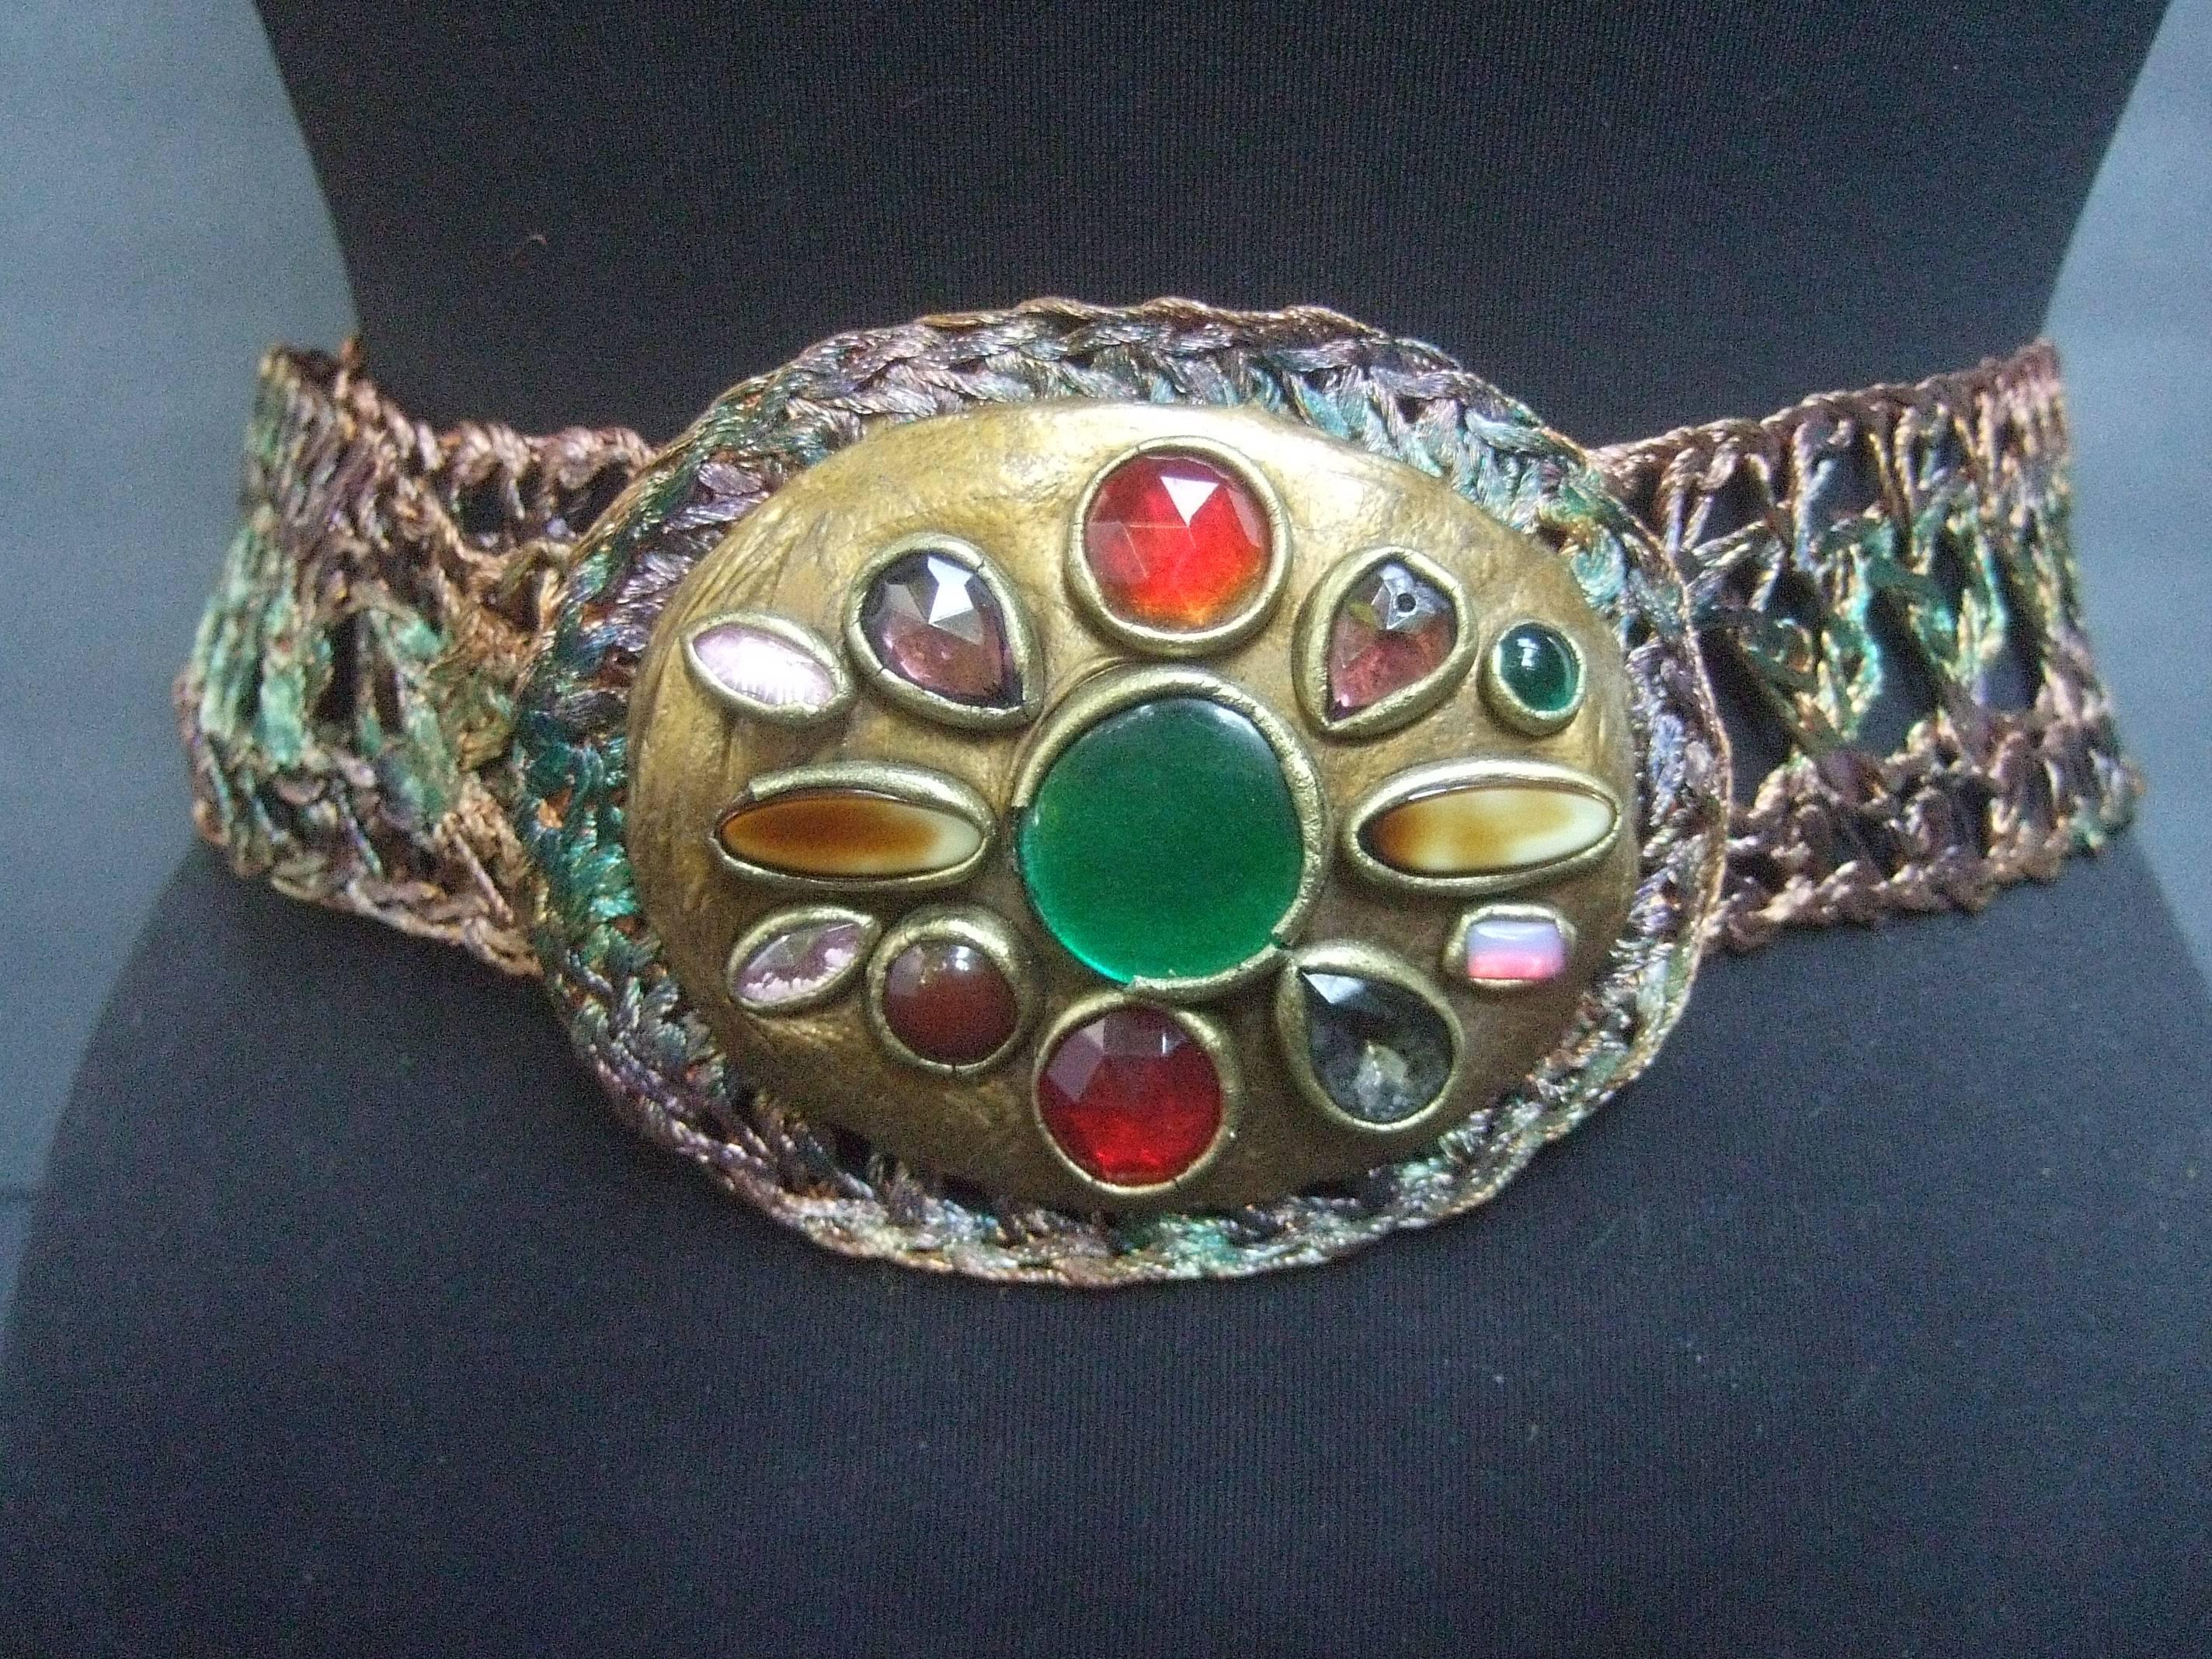 Artisan glass stone buckle woven metal belt c 1980s
The unique handmade artisan belt is designed 
with a large oval shaped buckle embellished 
with a collection of glittering glass stones

The glass stones range from smooth,